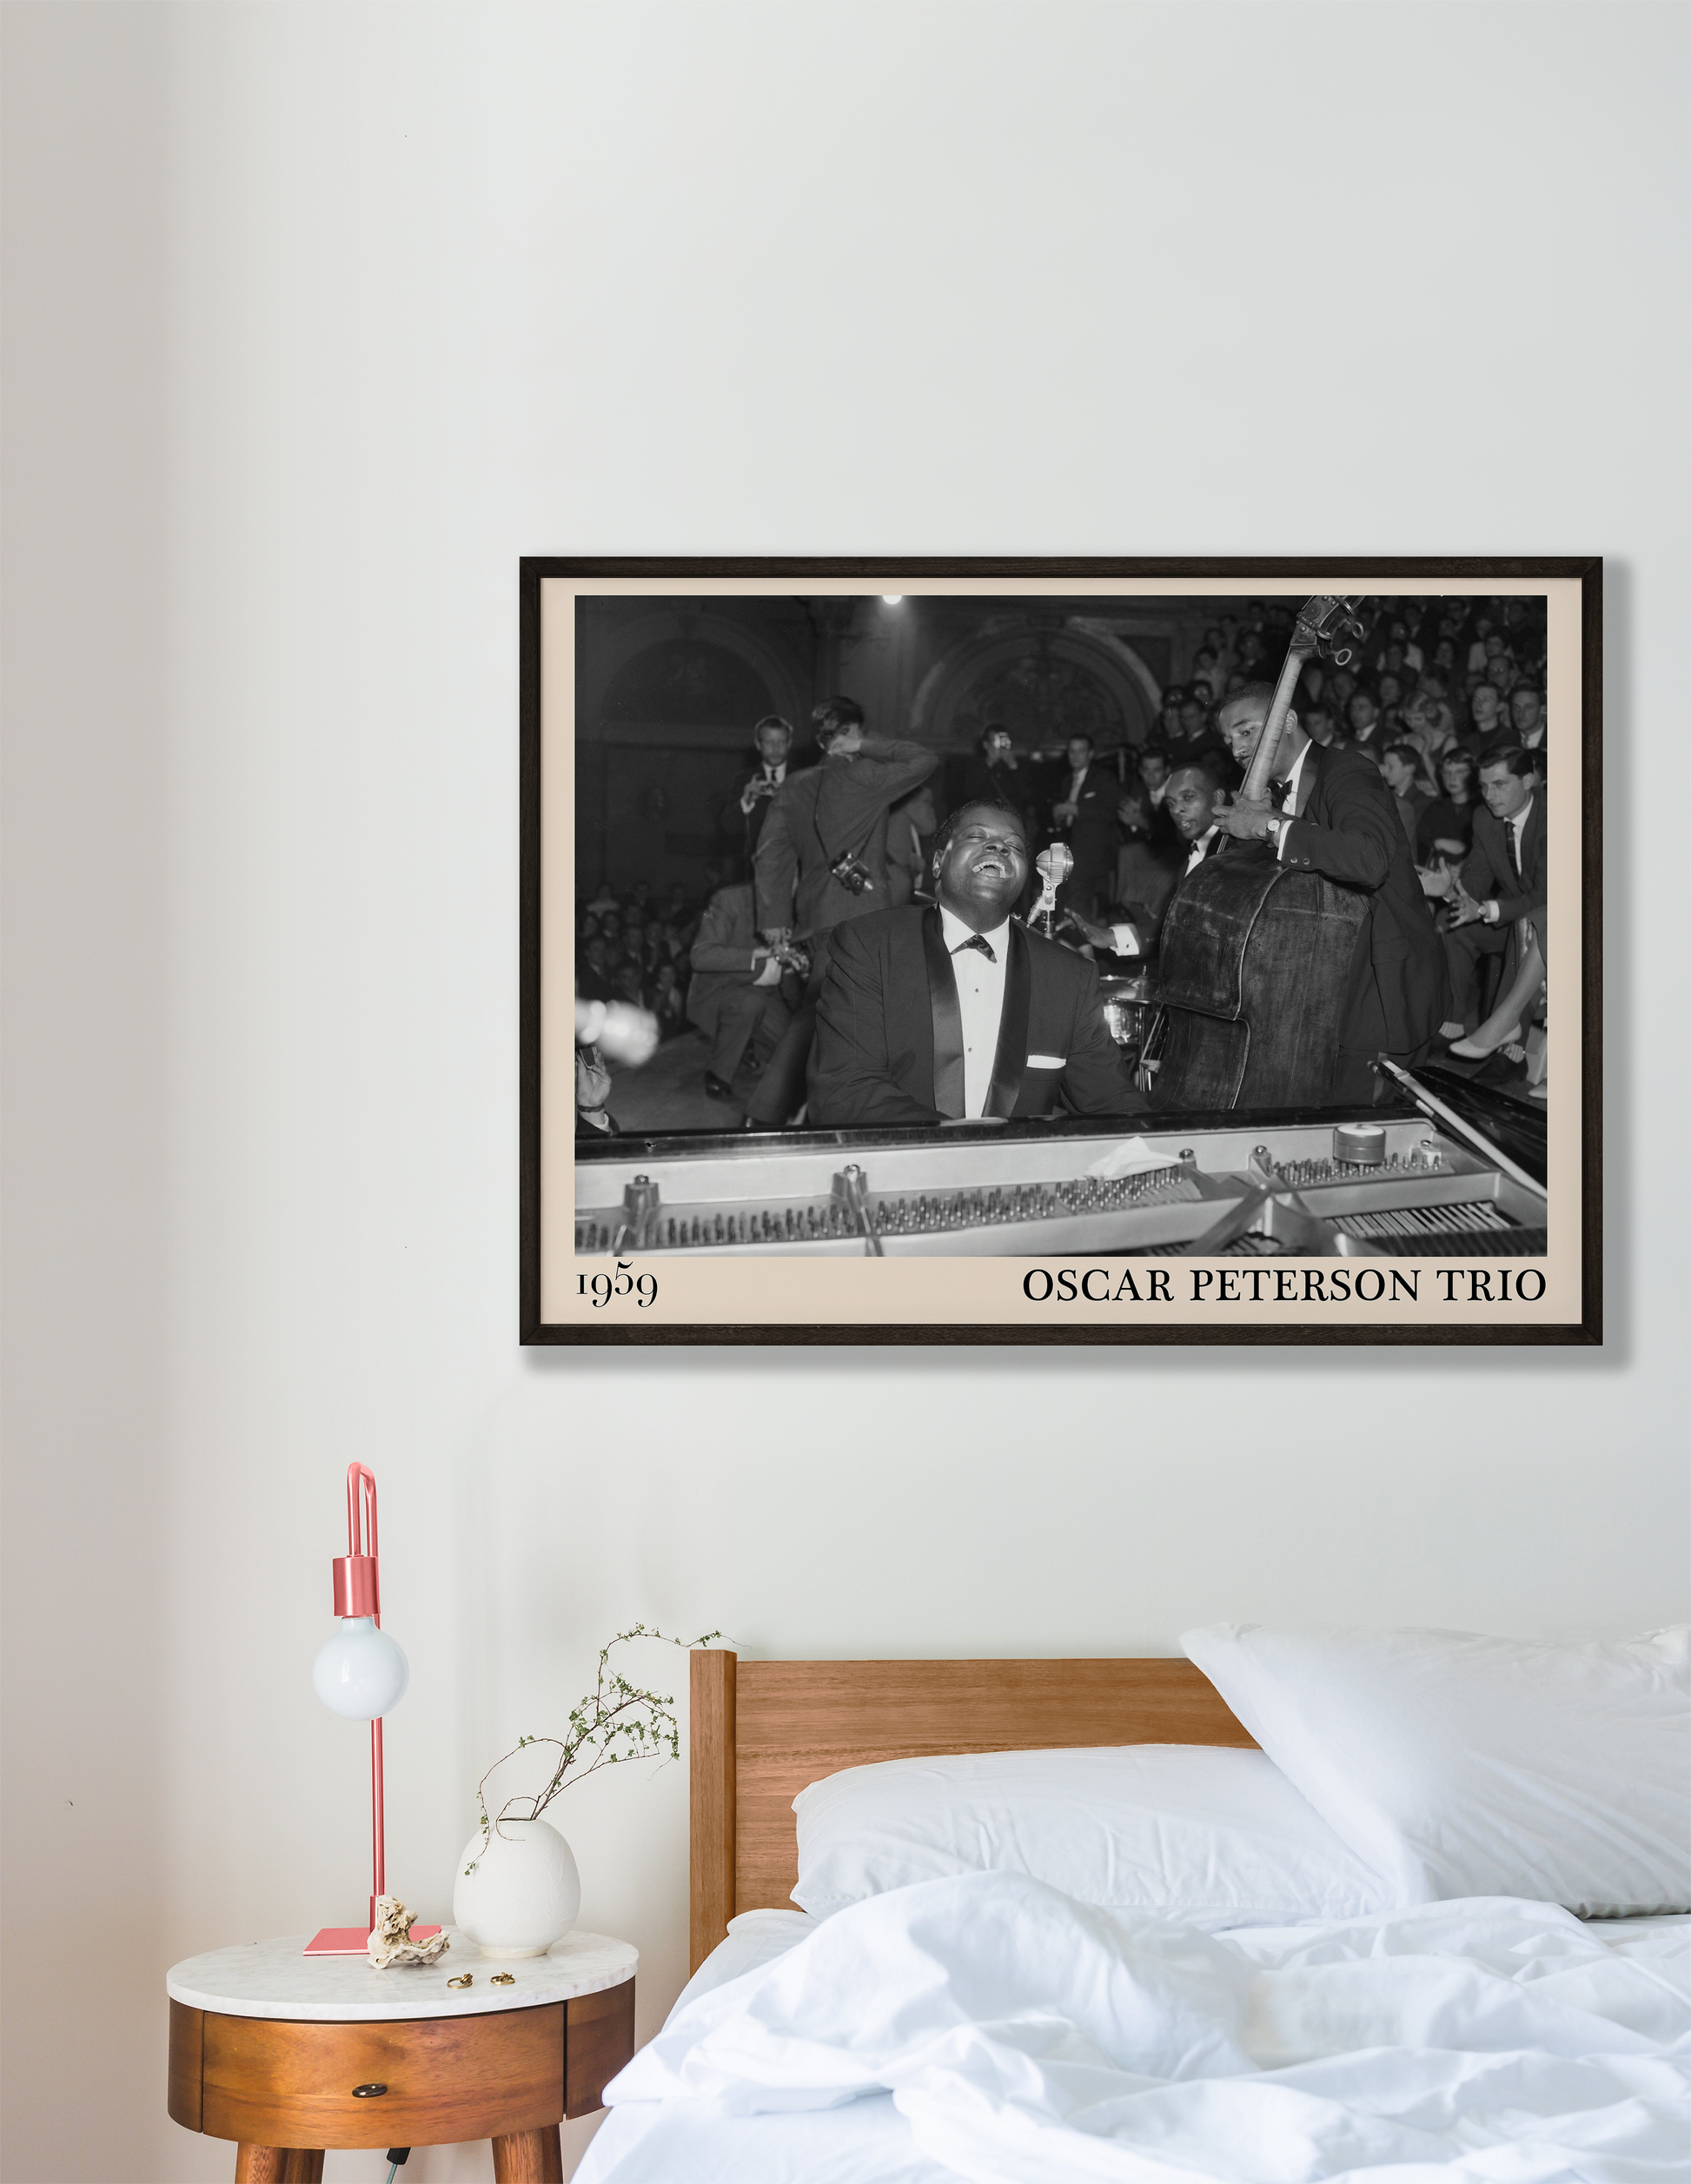 1959 picture of the Oscar Peterson Trio. Picture crafted into a cool black framed jazz print, with an off-white border. Poster is hanging on a grey bedroom wall